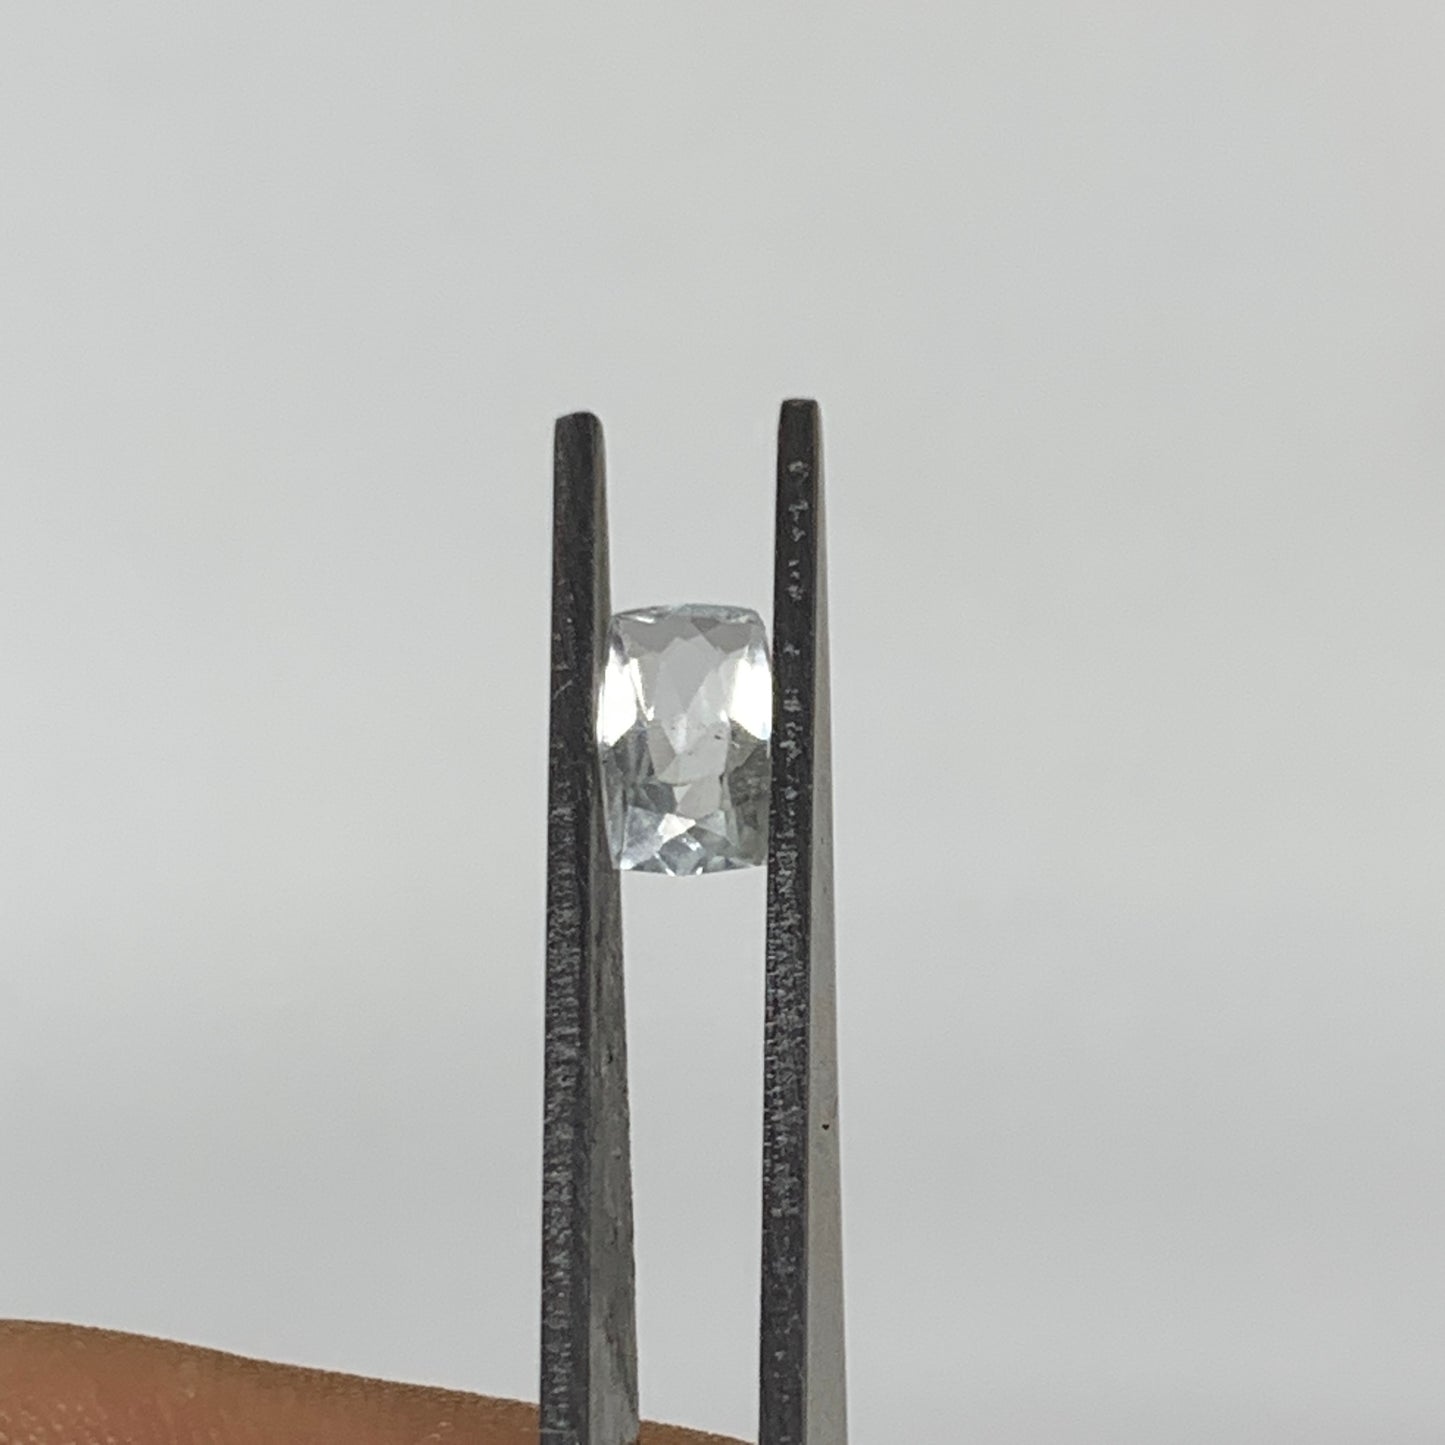 1.02cts, 8mmx5mmx3mm, Aquamarine Crystal Facetted Stone Loose @Pakistan,CTS210